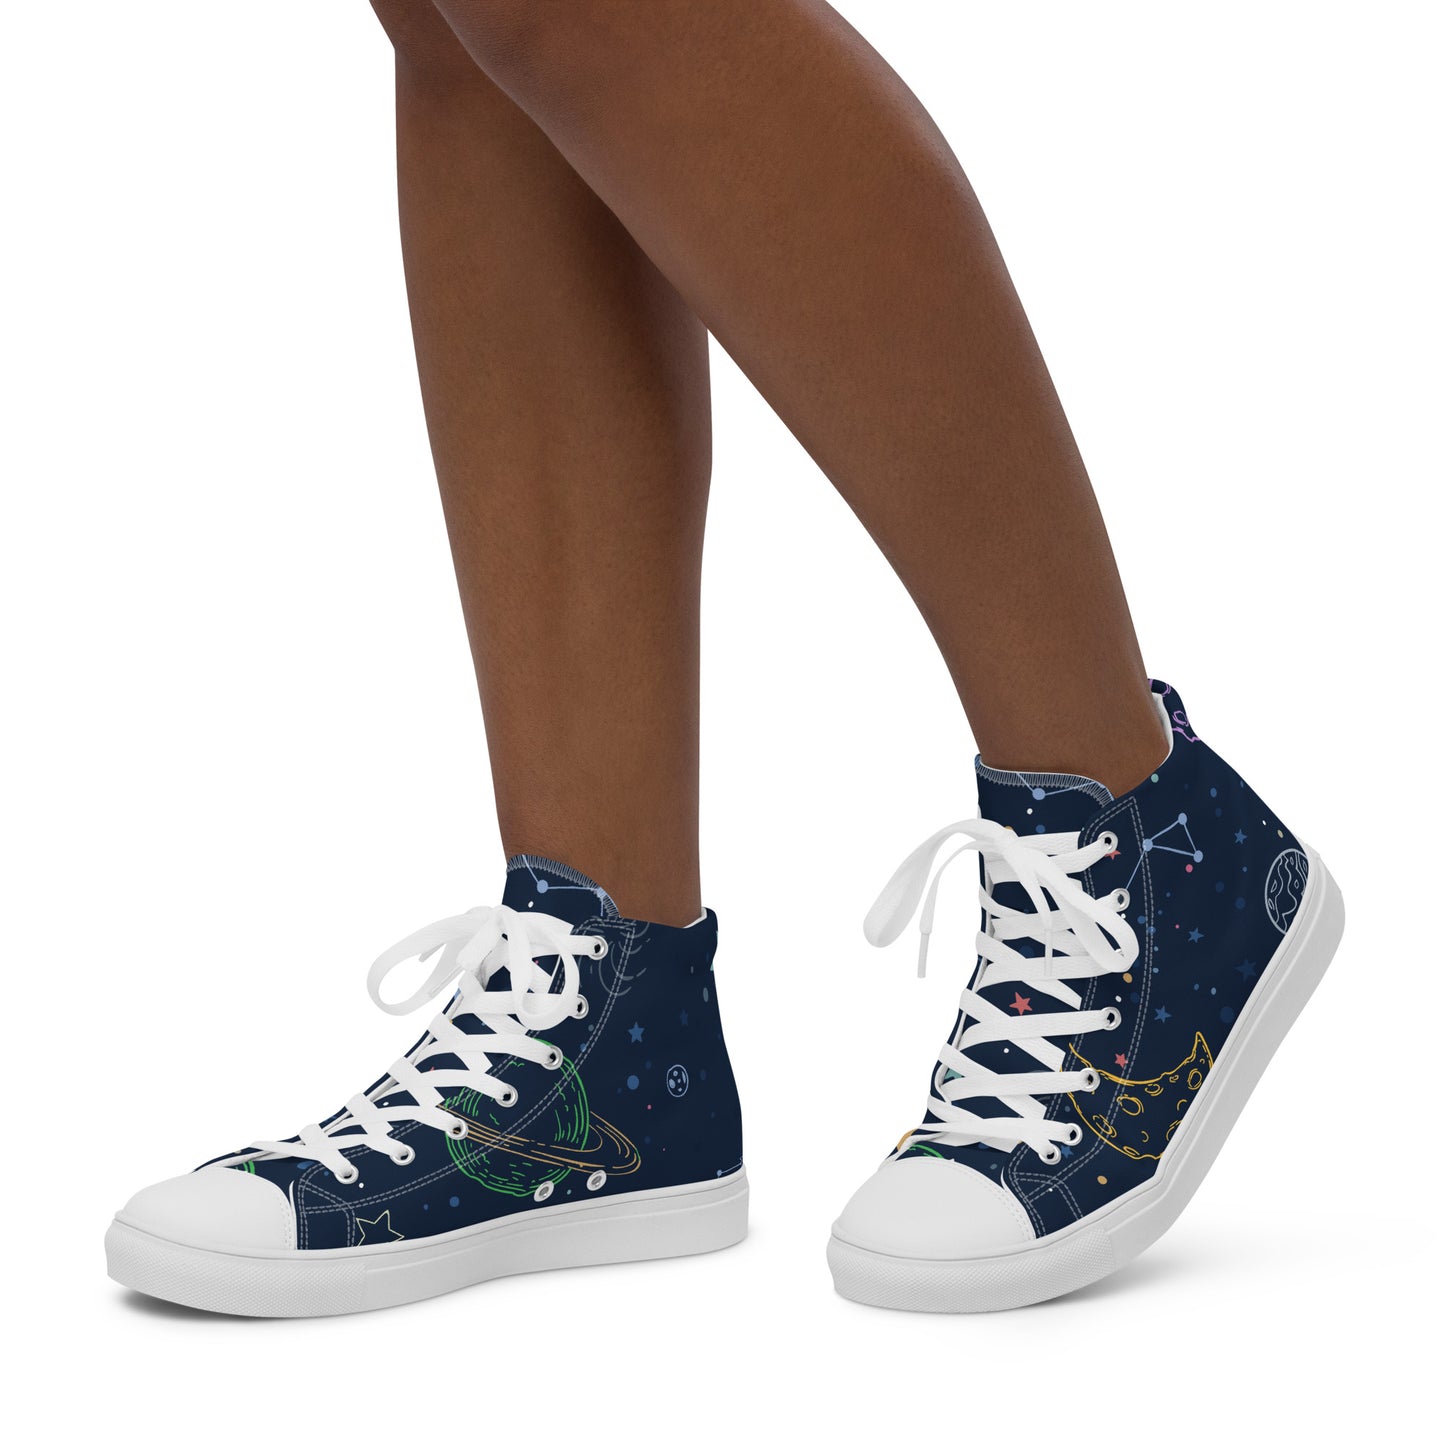 Women’s Night Sky Edition High Top Sneakers - LuminoPlace